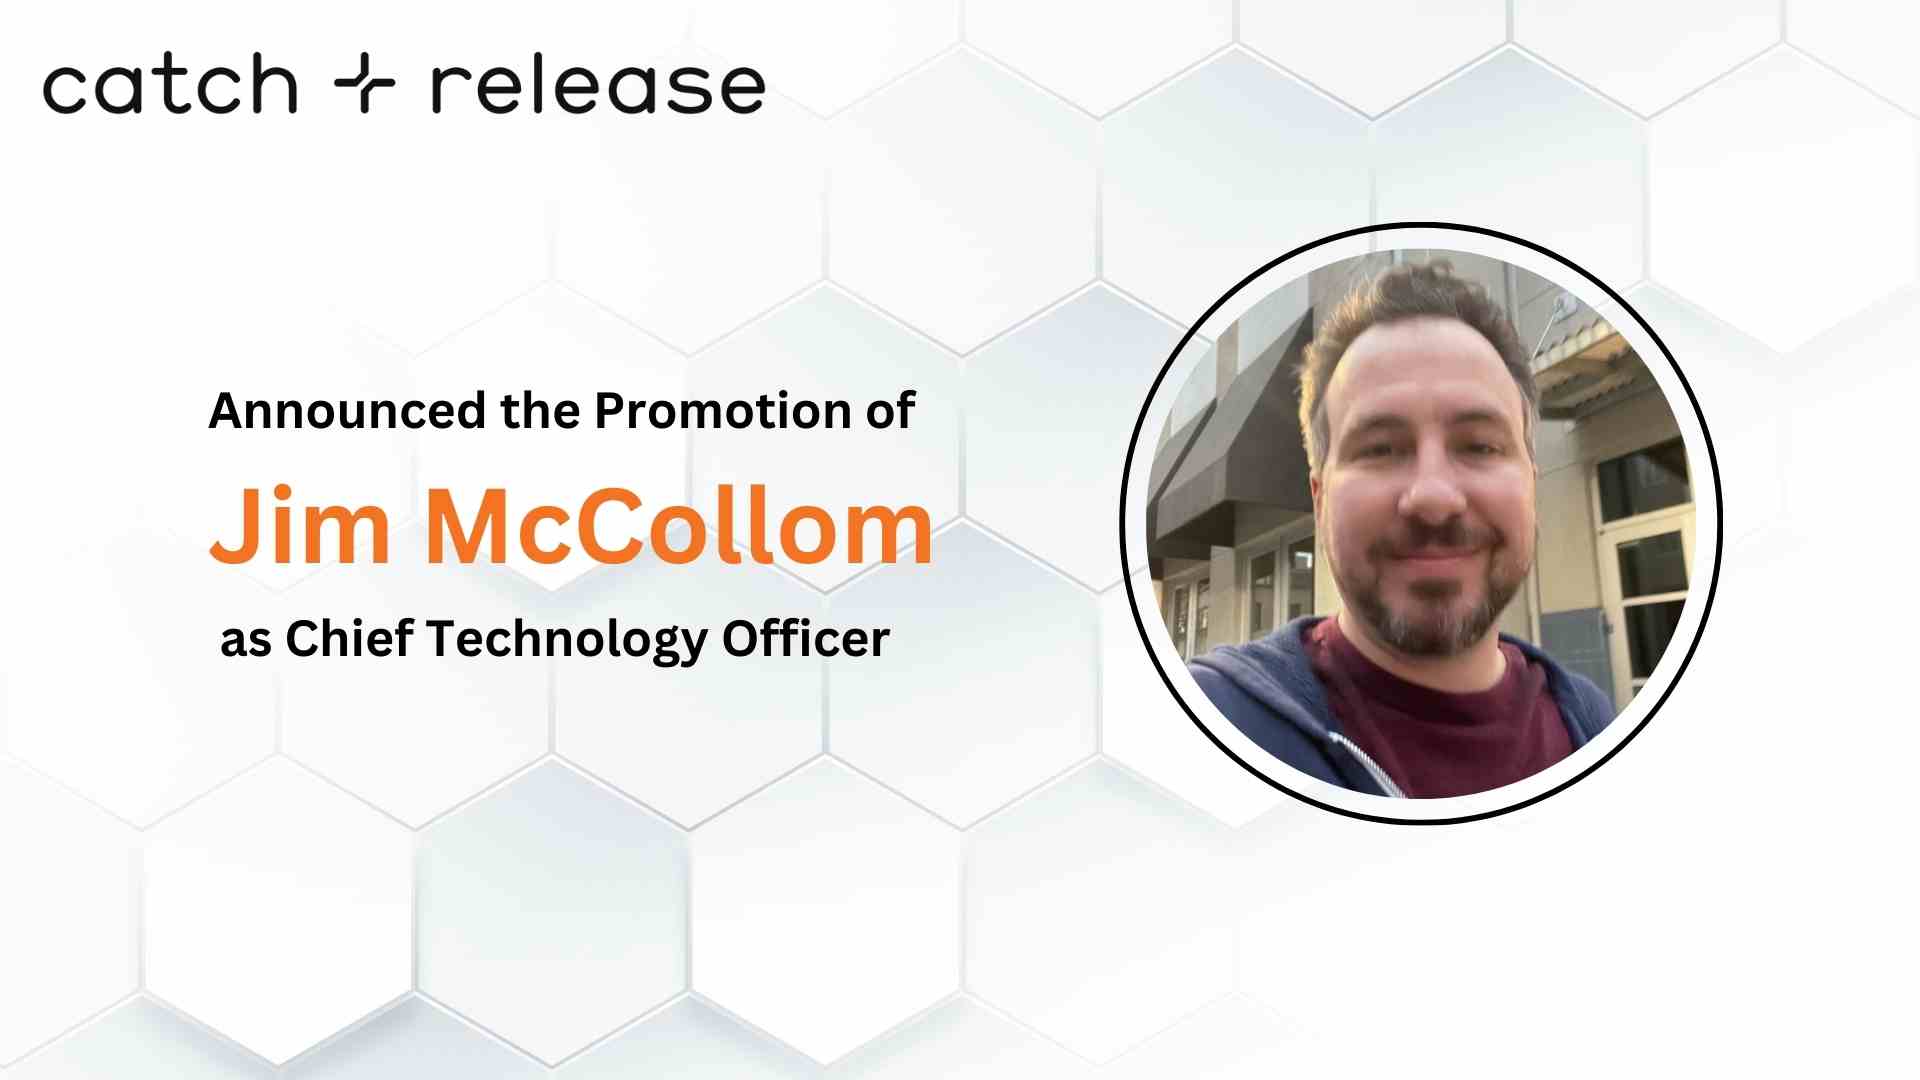 Catch+Release Names Its First Chief Technology Officer, Jim McCollom